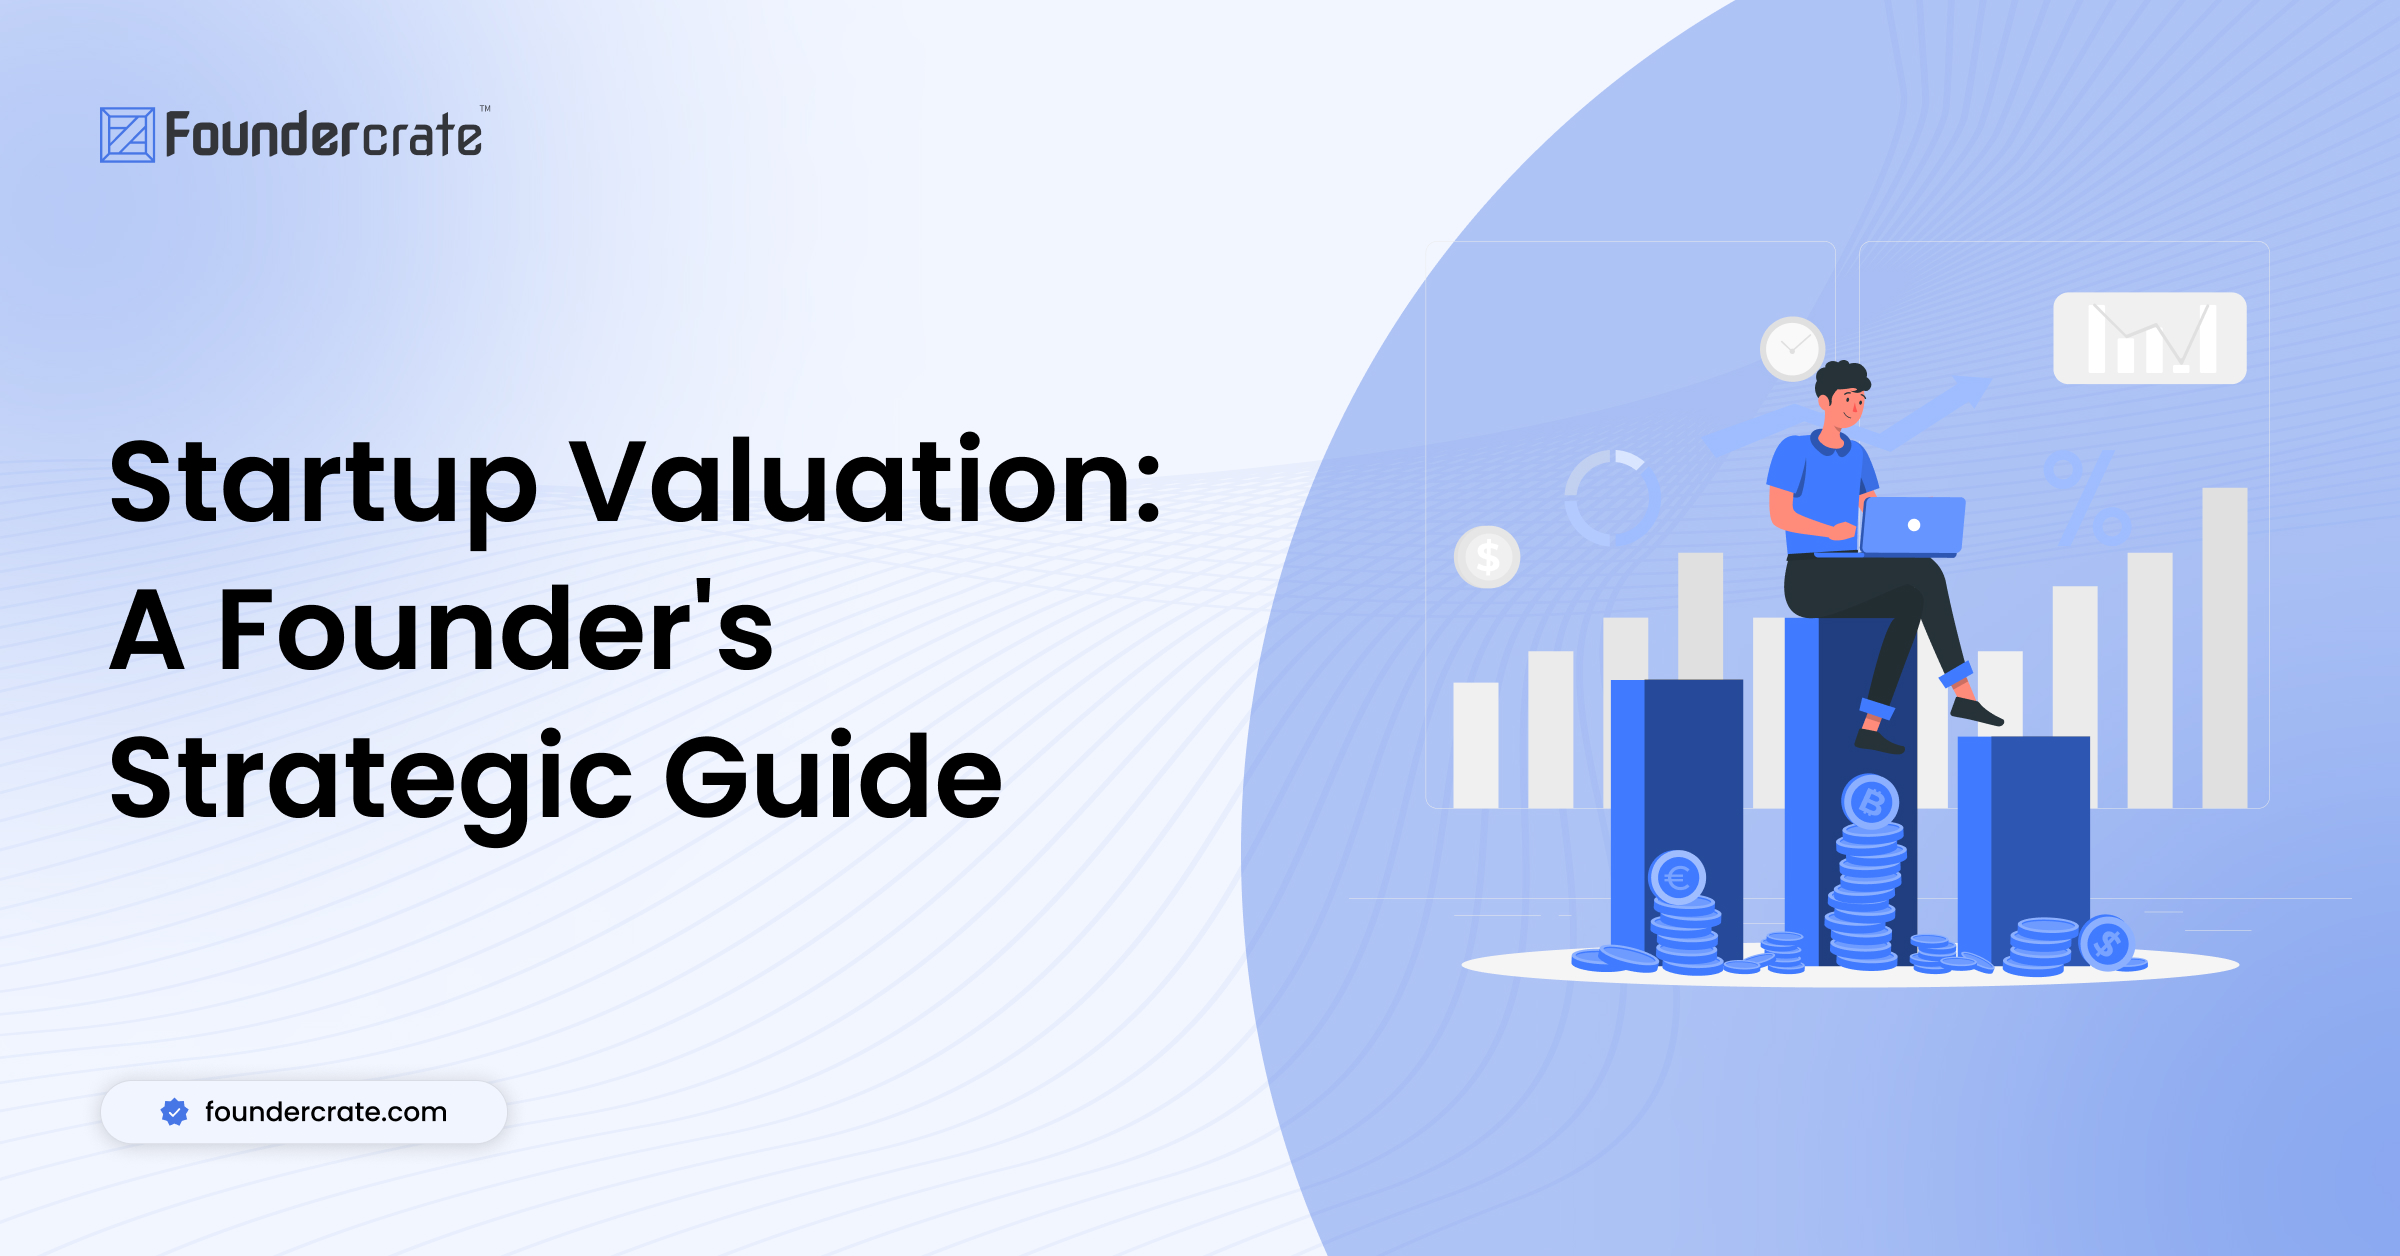 Startup Valuation: A Founder’s Strategic Guide